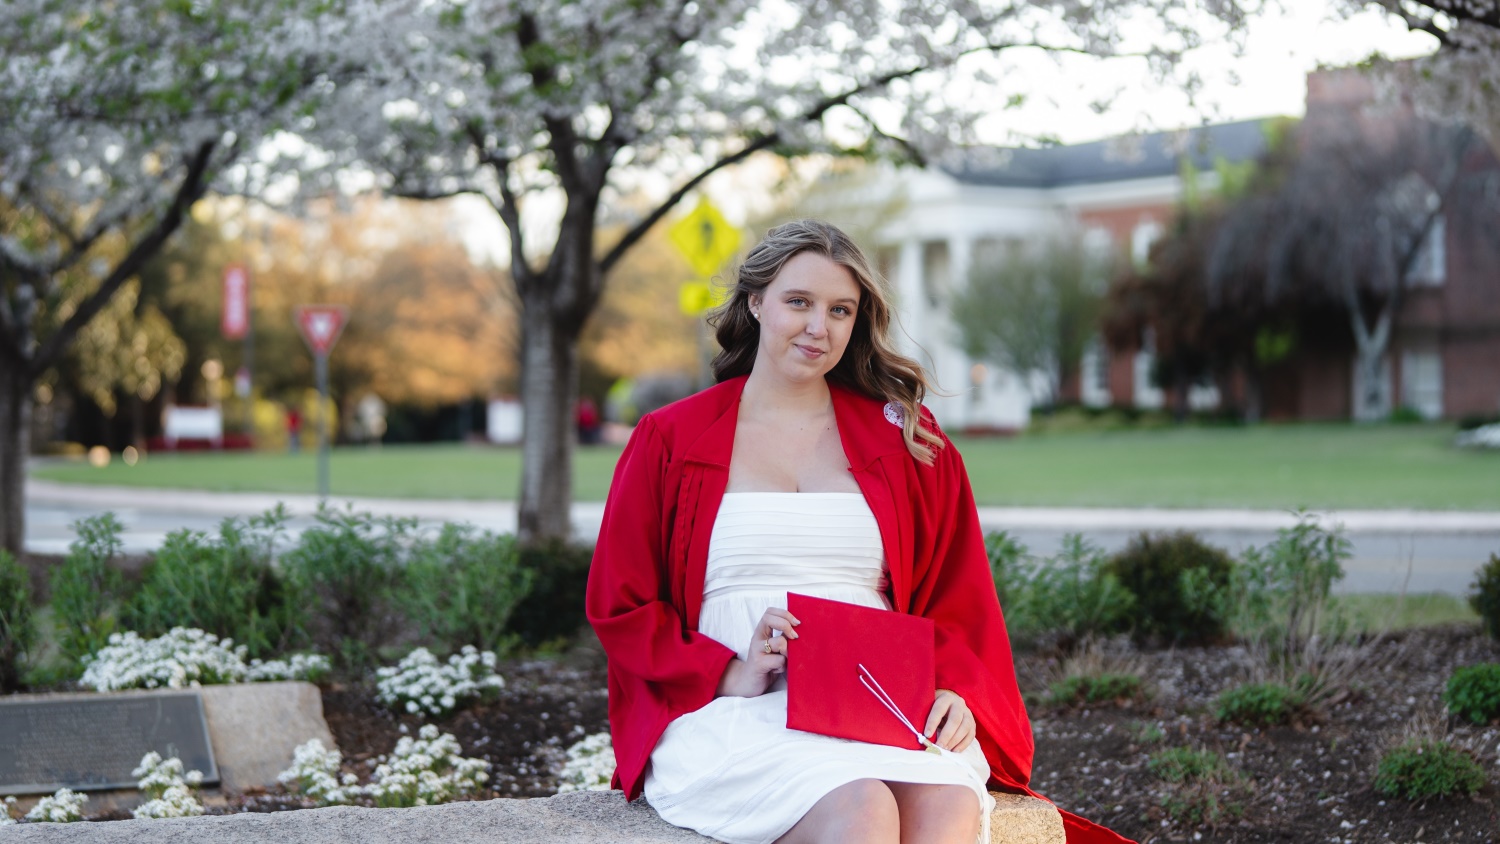 Olivia Ball sitting on a bench among flowering plants in her graduation gown holding her cap.